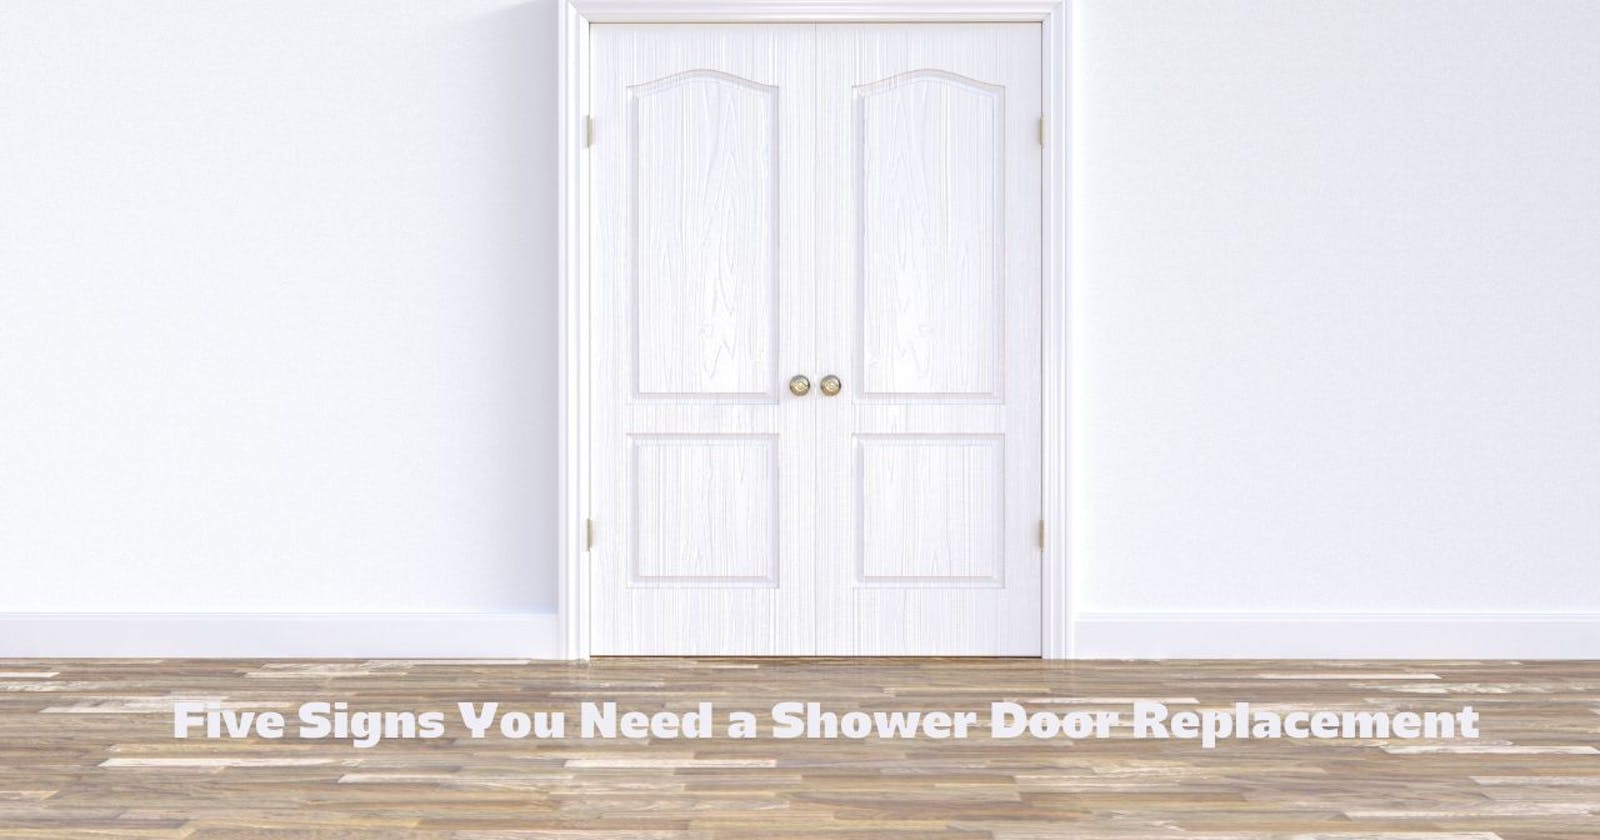 Five Signs You Need a Shower Door Replacement